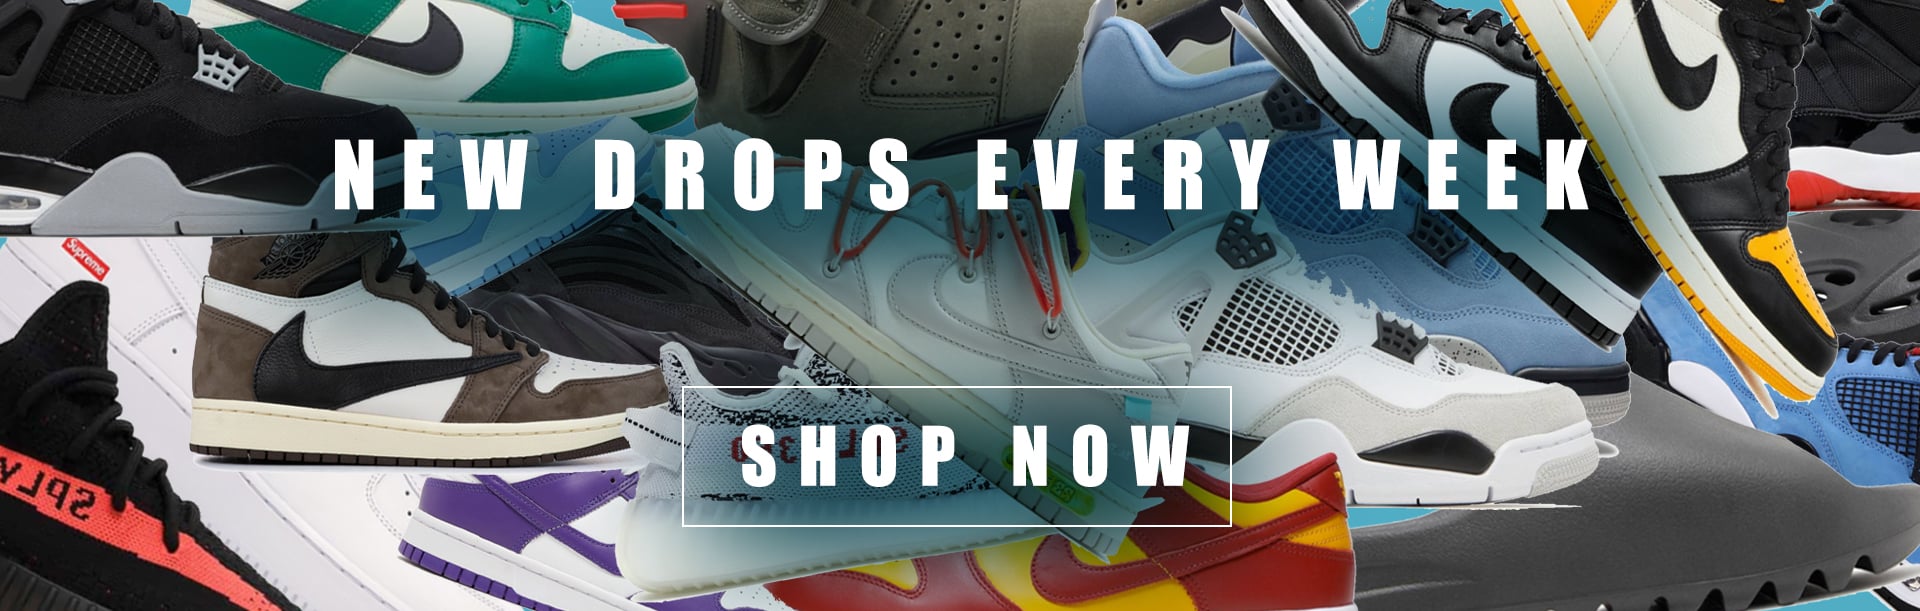 Hidden hype new arrivals banner for home page